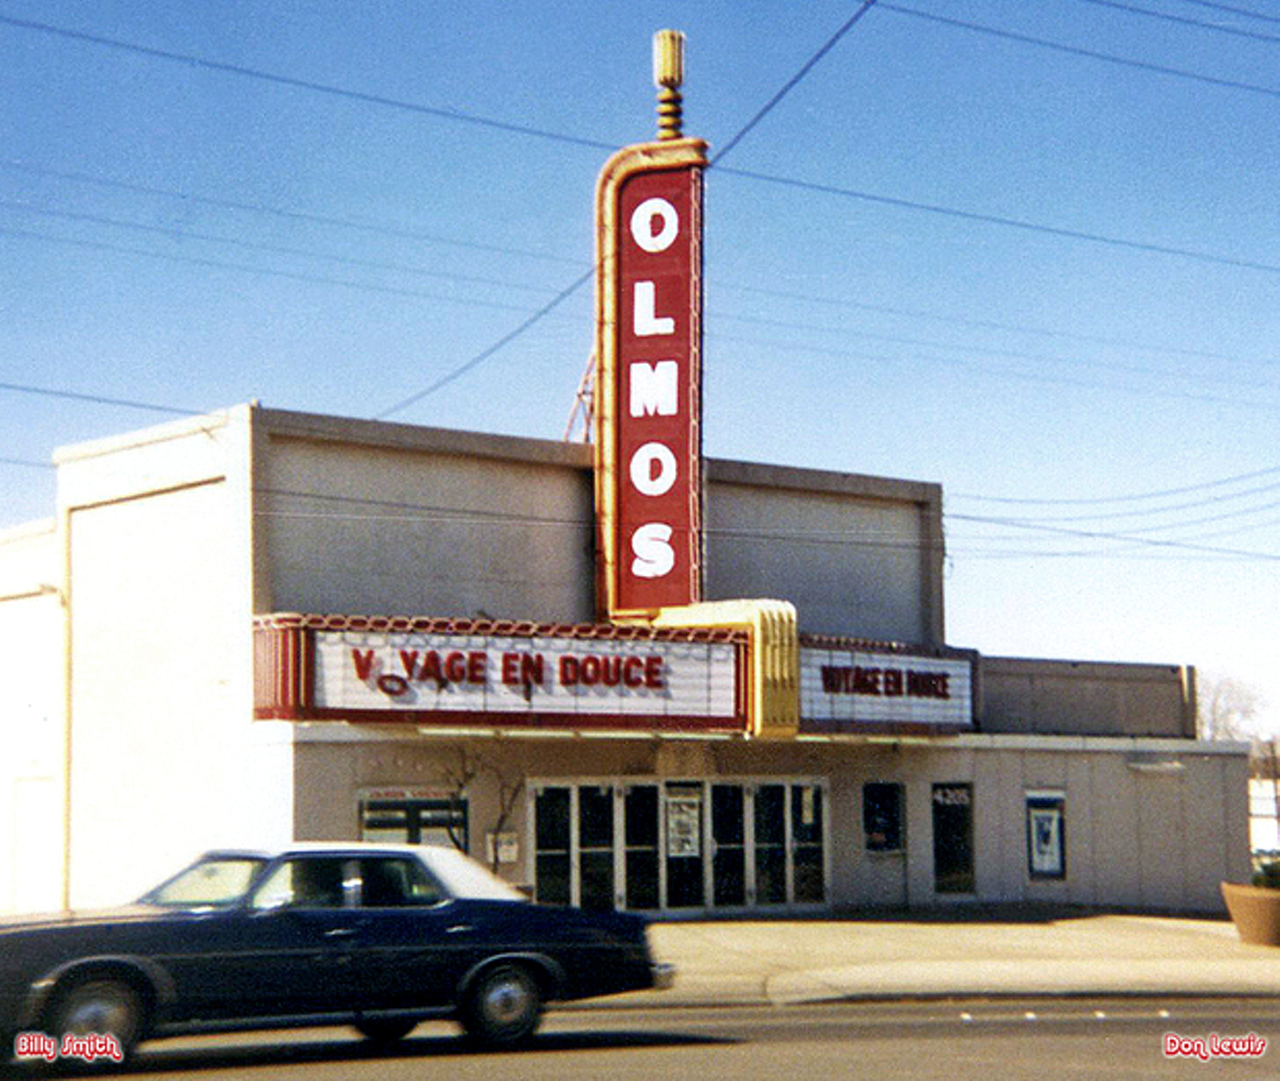 Olmos Theatre
Olmos Park has long since said goodbye to Olmos Theatre, an iconic auditorium that served as the flagship of the Santikos Theatre chain after its 1949 opening. With a large screen that had a gold curtain, the theatre walls had memorable floral patterned artwork throughout. But with the rise of other theatres, the Olmos spot lost some of its power. During its last days in the ‘80s, the venue served as an X-rated movie theatre.
Photo via cinematreasures.org